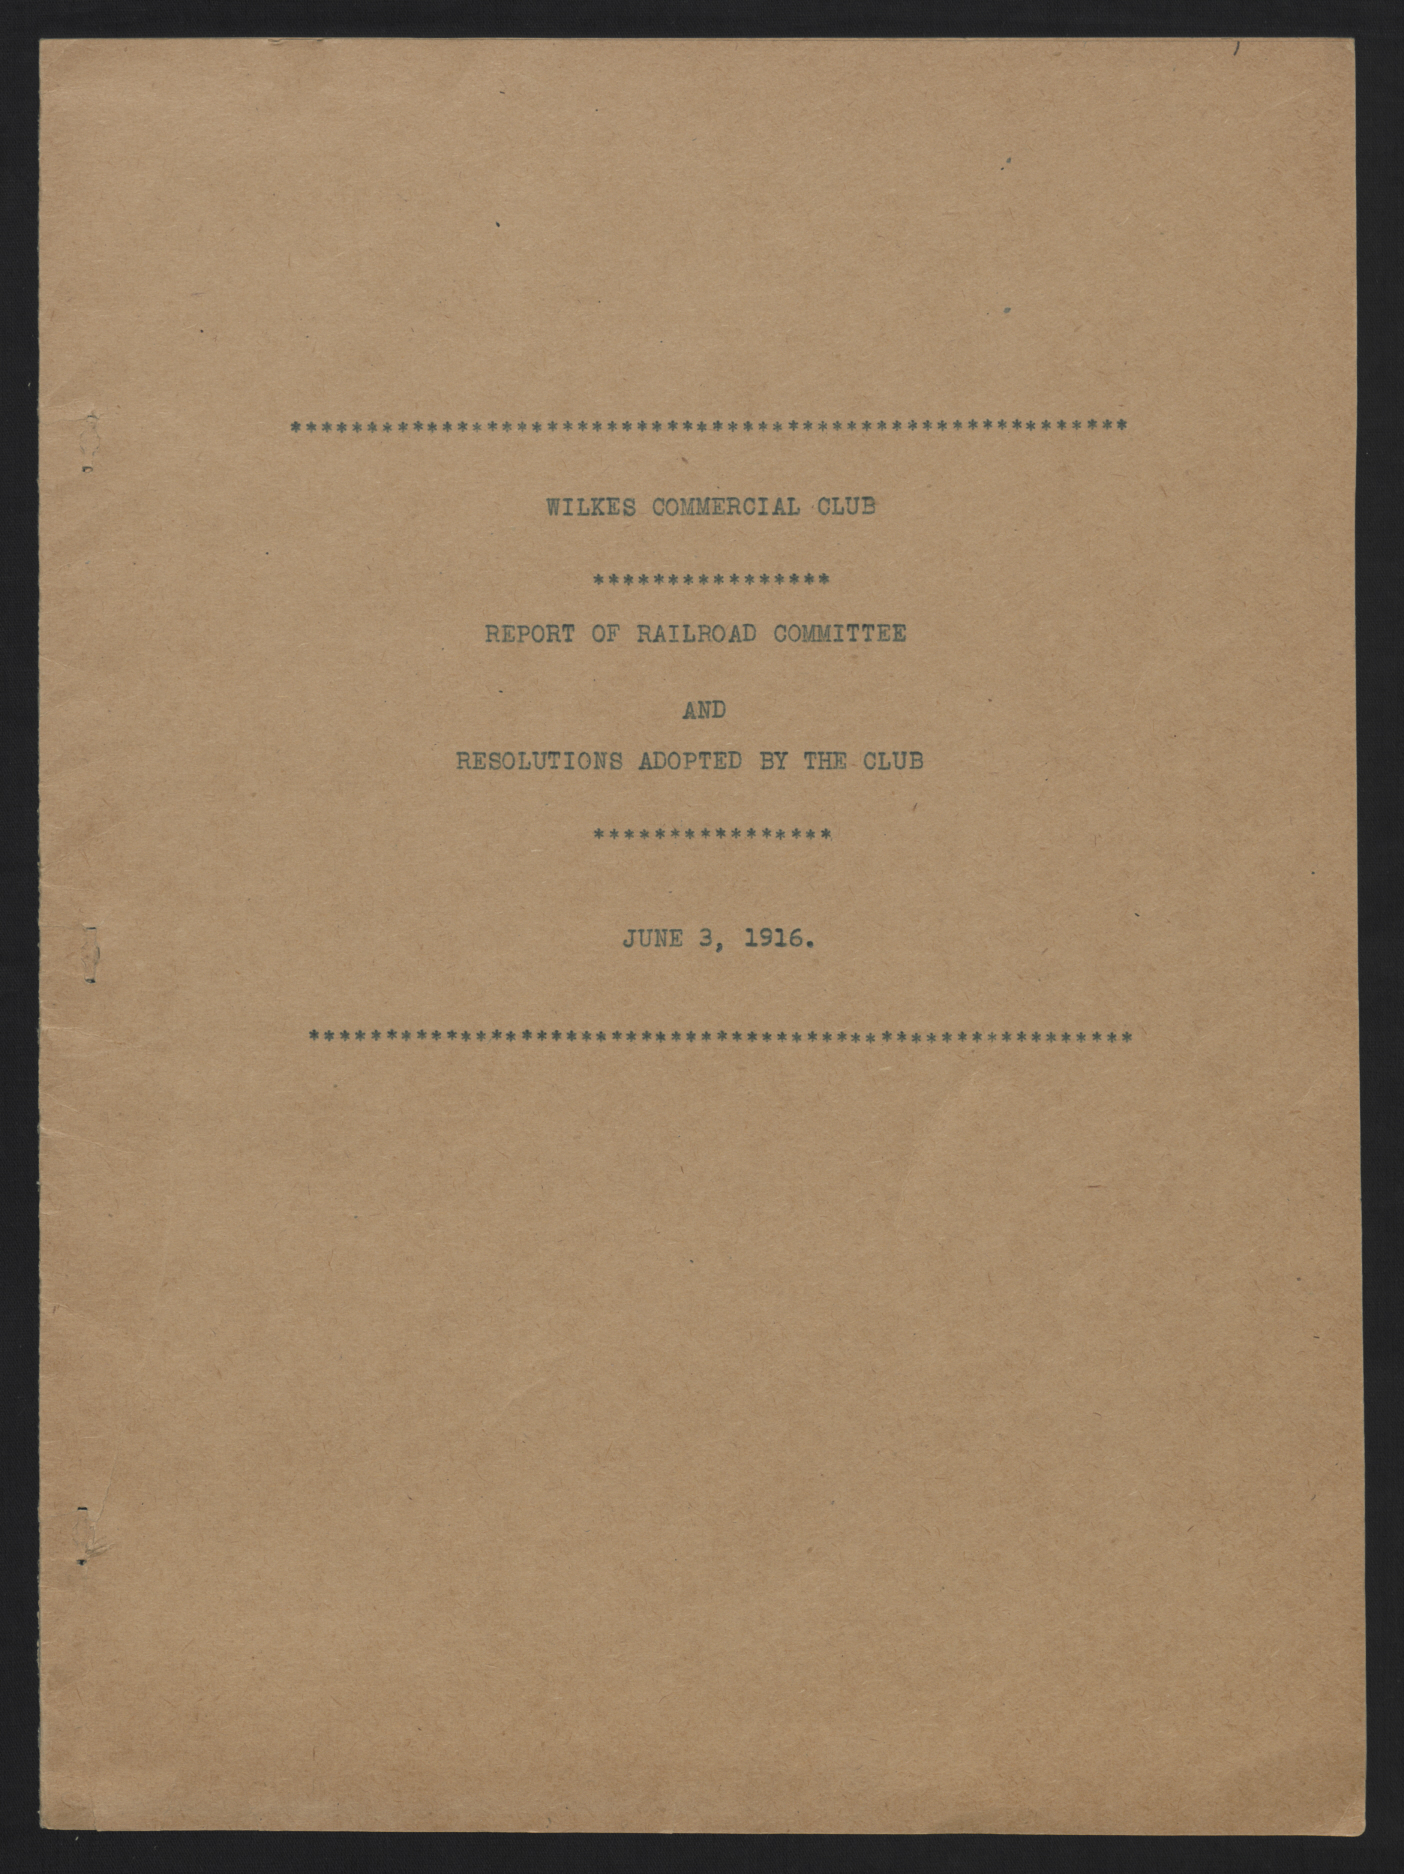 Report of the Wilkes Commercial Club Railroad Committee, 2 June 1916, page 1